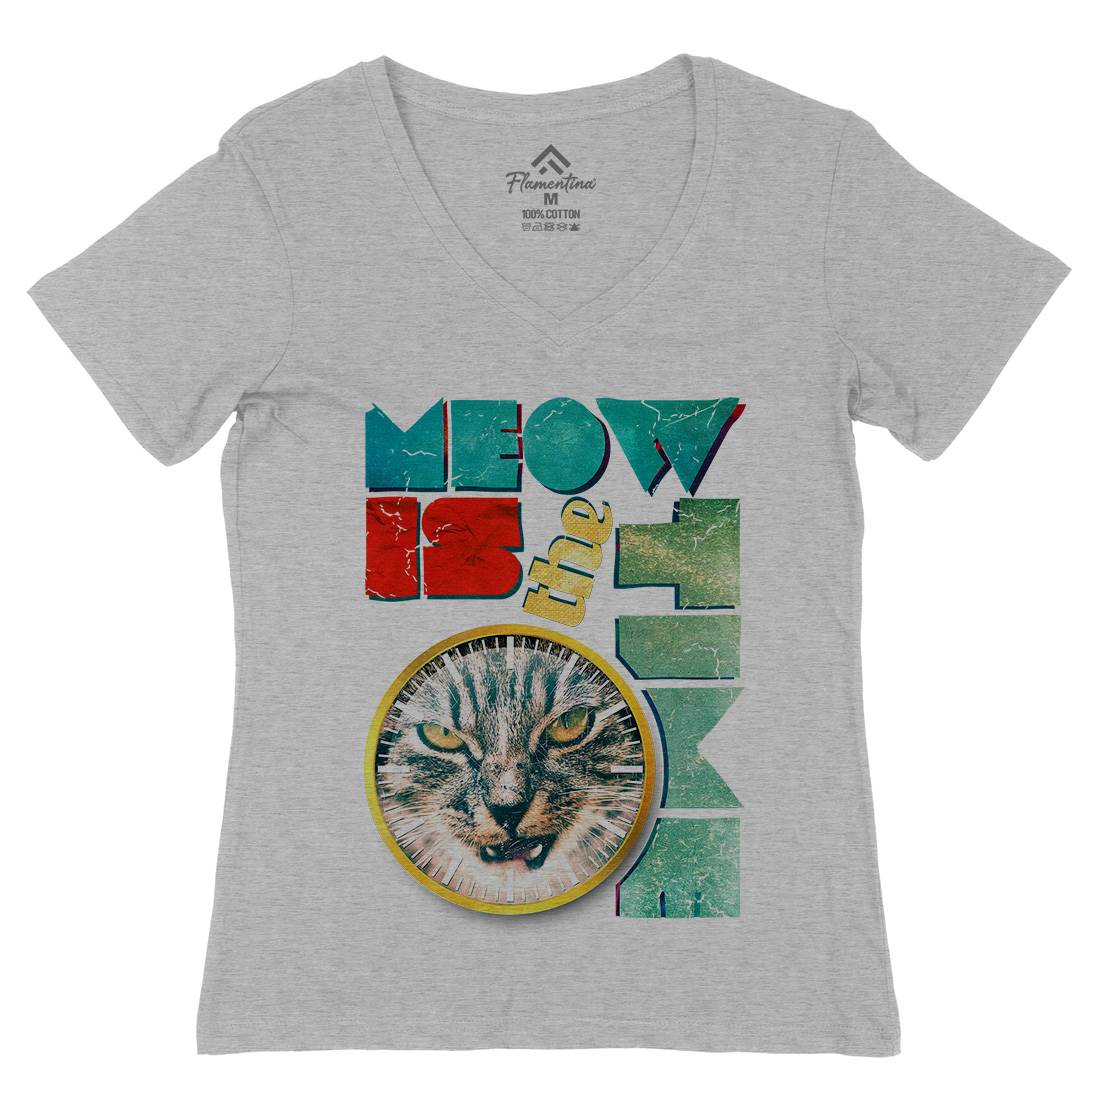 Meow Is The Time Womens Organic V-Neck T-Shirt Animals A876